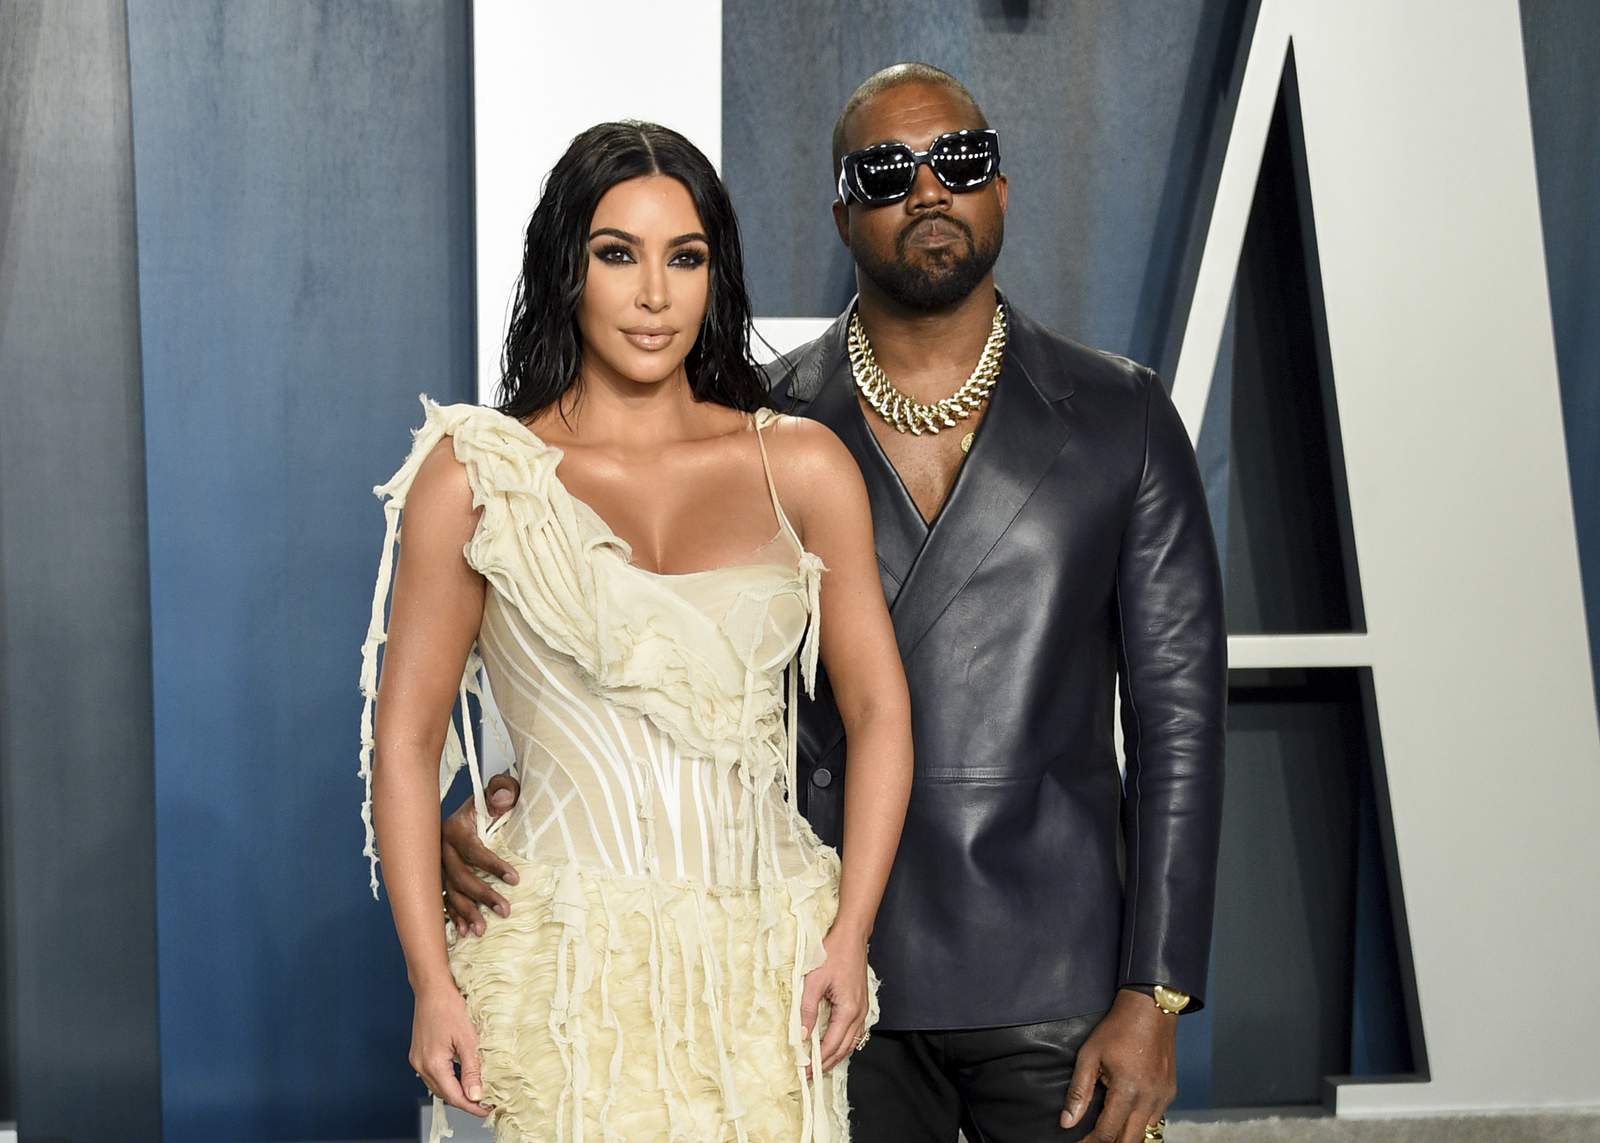 Kim K asks public to show compassion, empathy to Kanye West